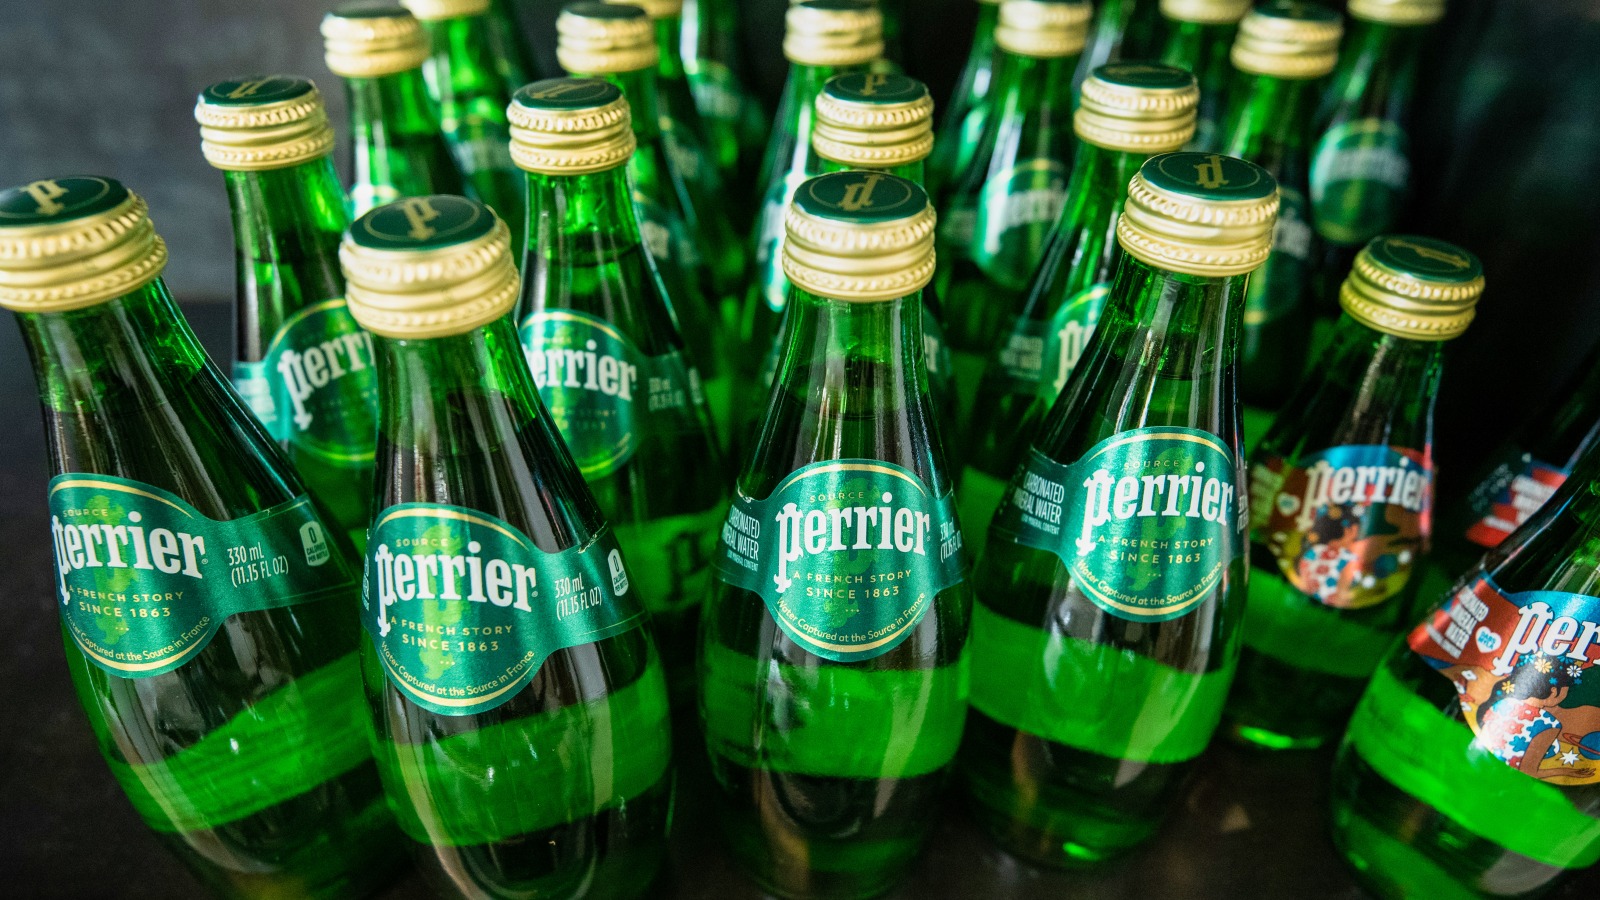 what kind of drink is perrier?